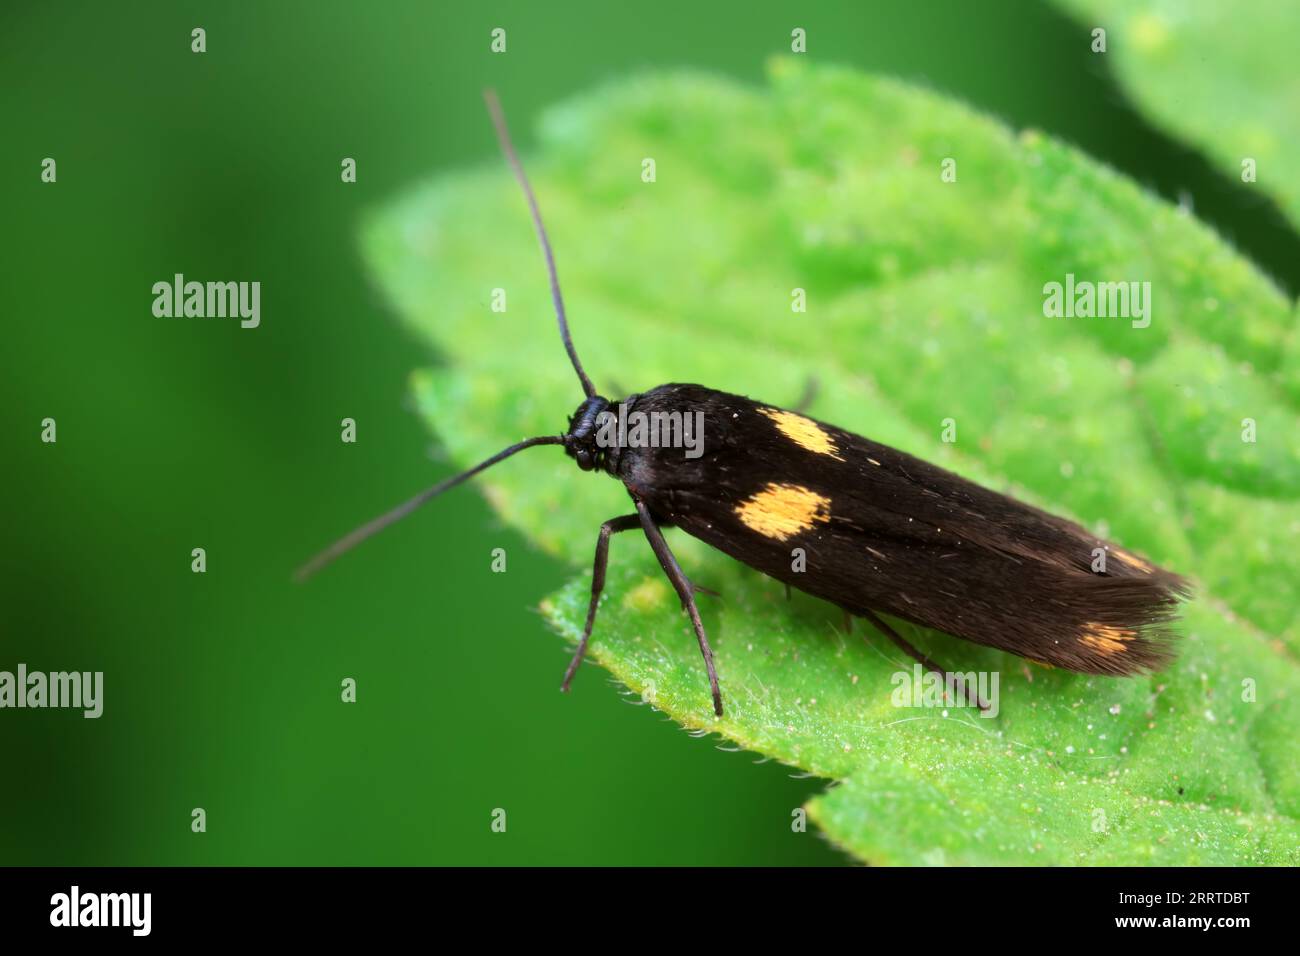 Lepidoptera insects in the wild, North China Stock Photo